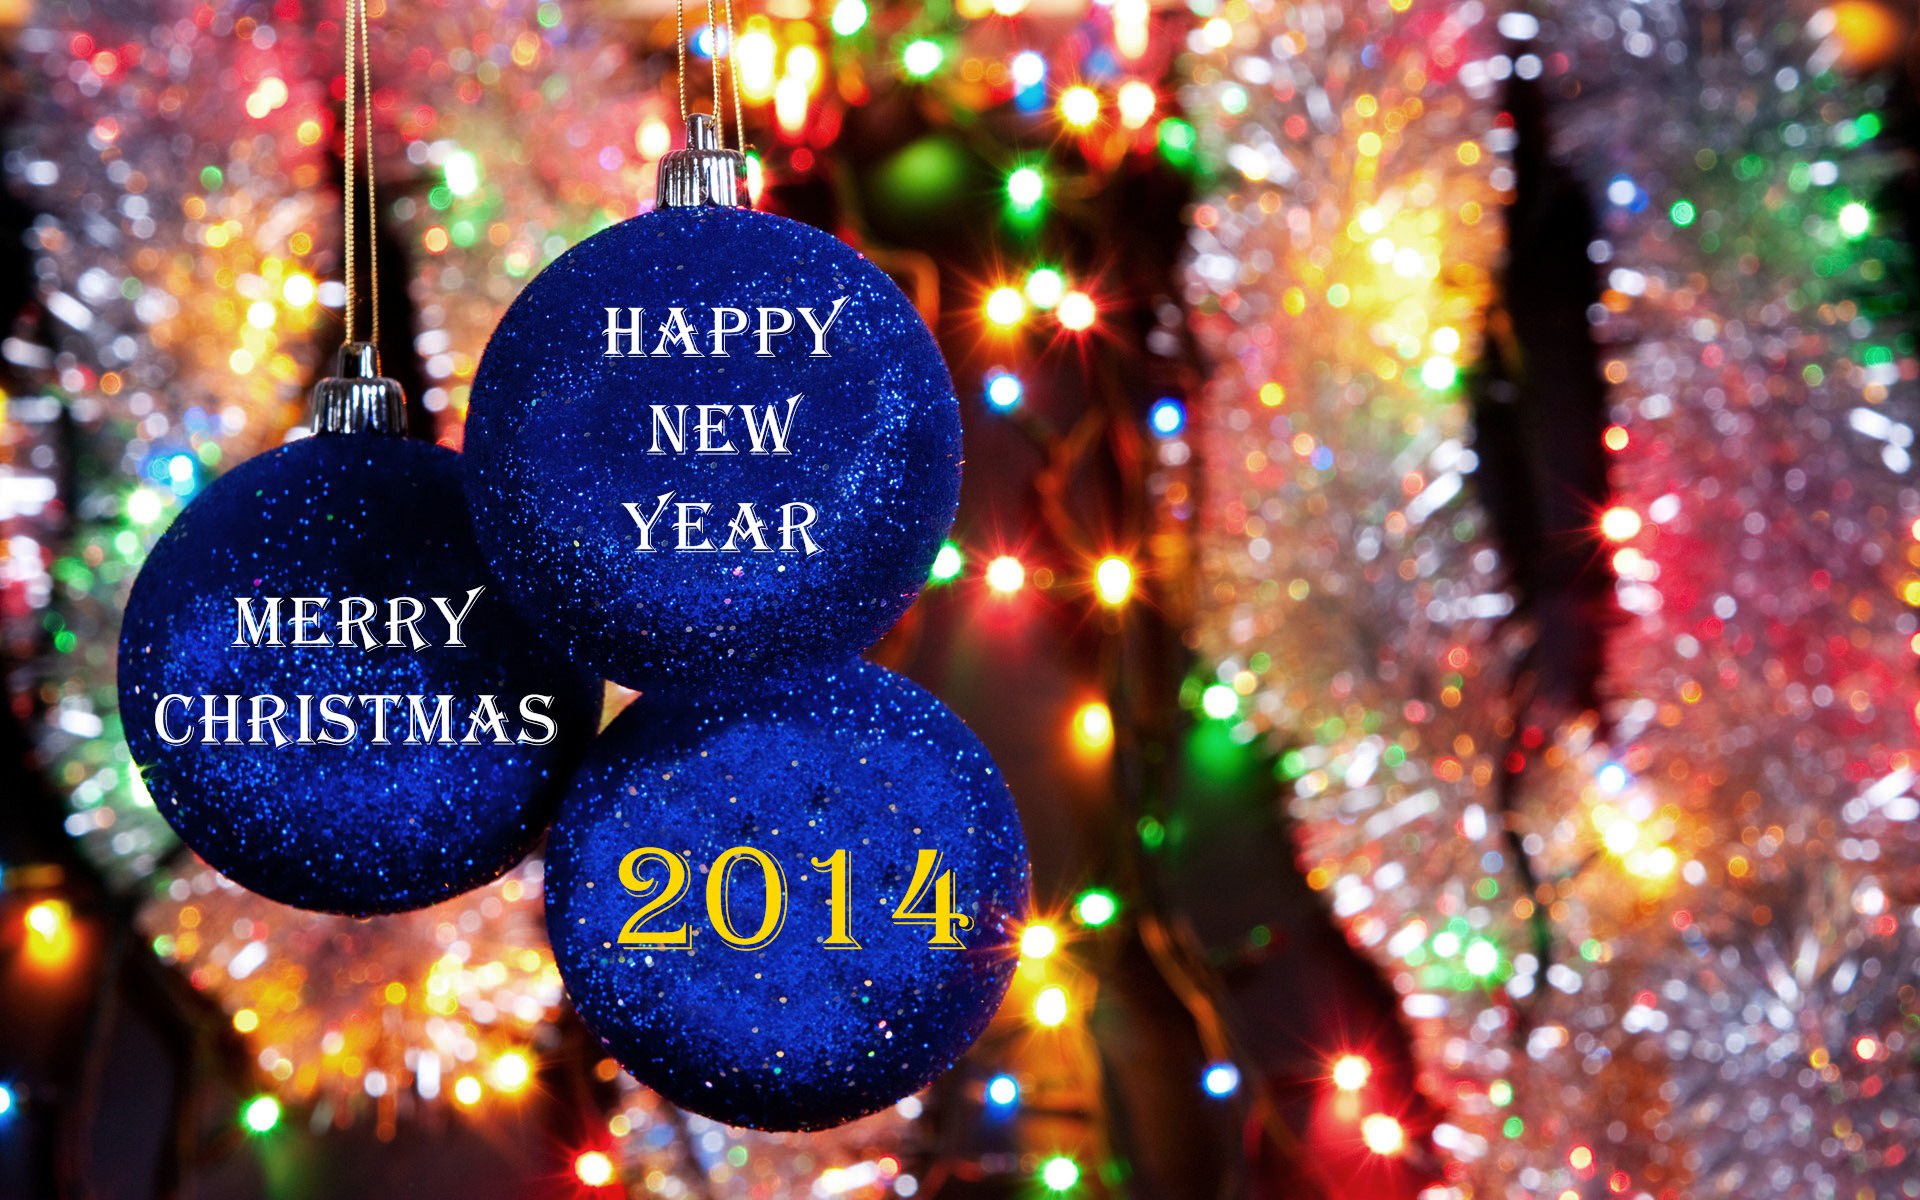 2014 New Year Theme HD Wallpapers (2) #6 - 1920x1200